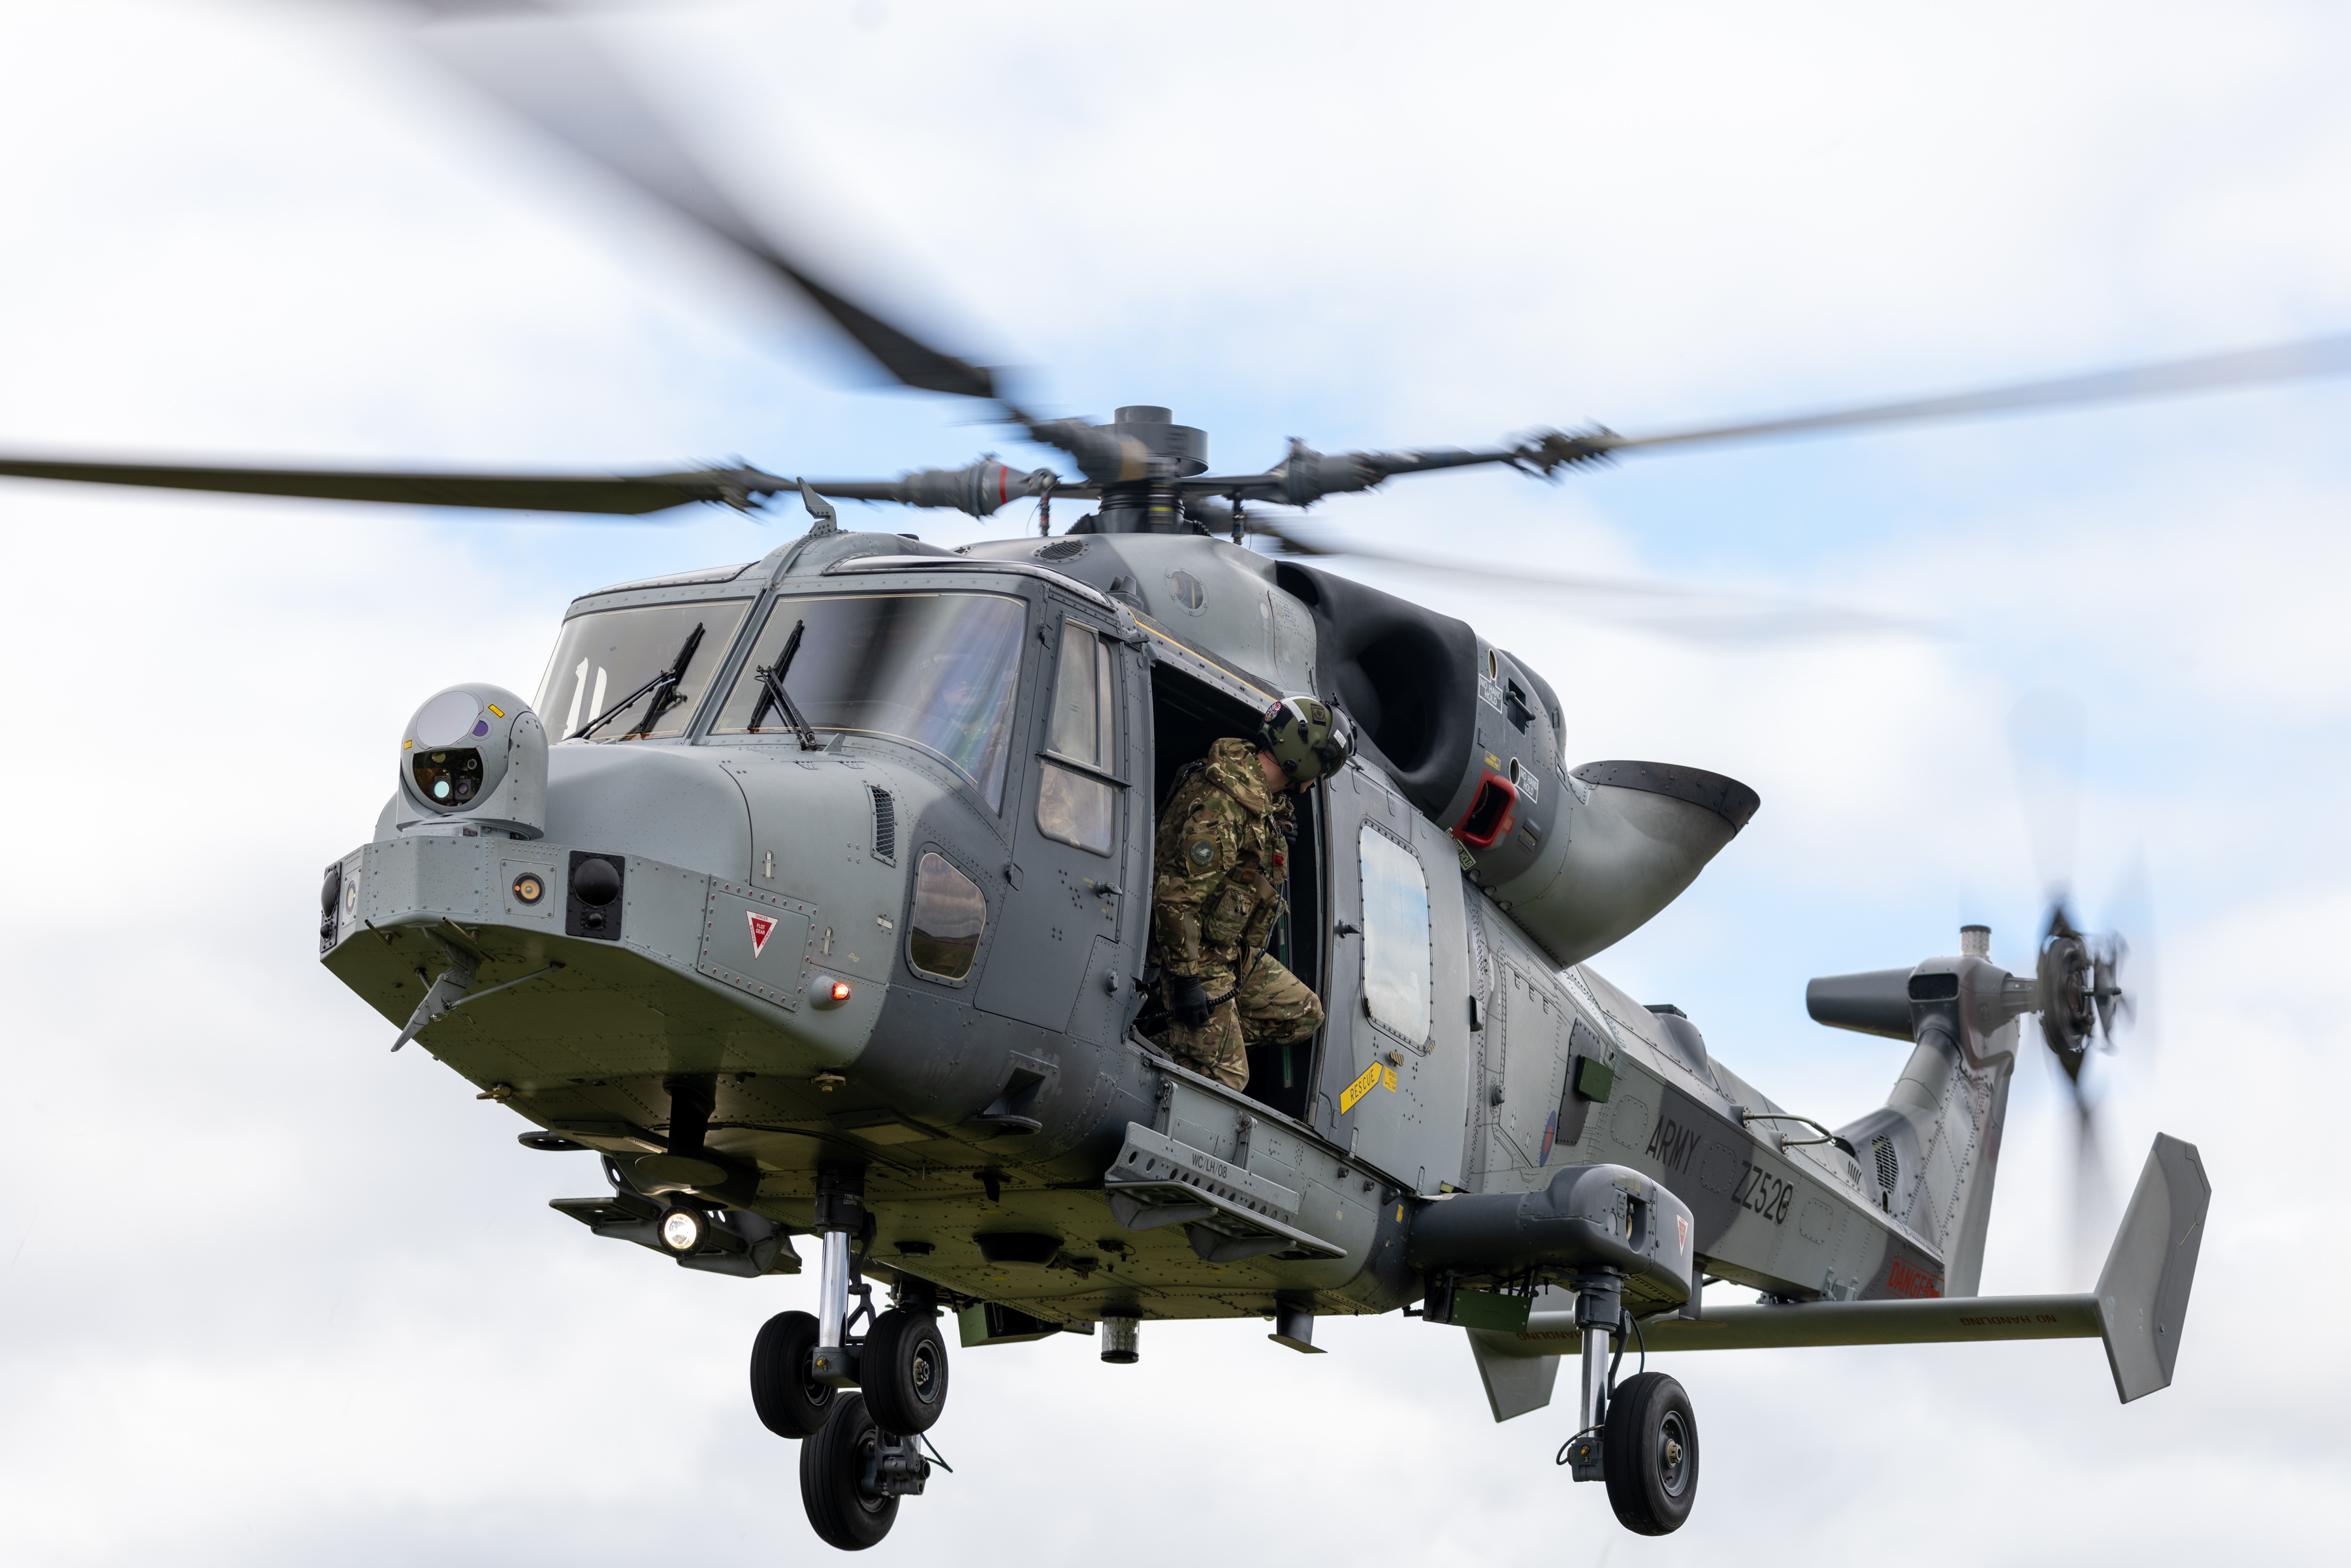 Wildcat Mk1 and Wildcat Mk2 helicopter - Defence Equipment & Support